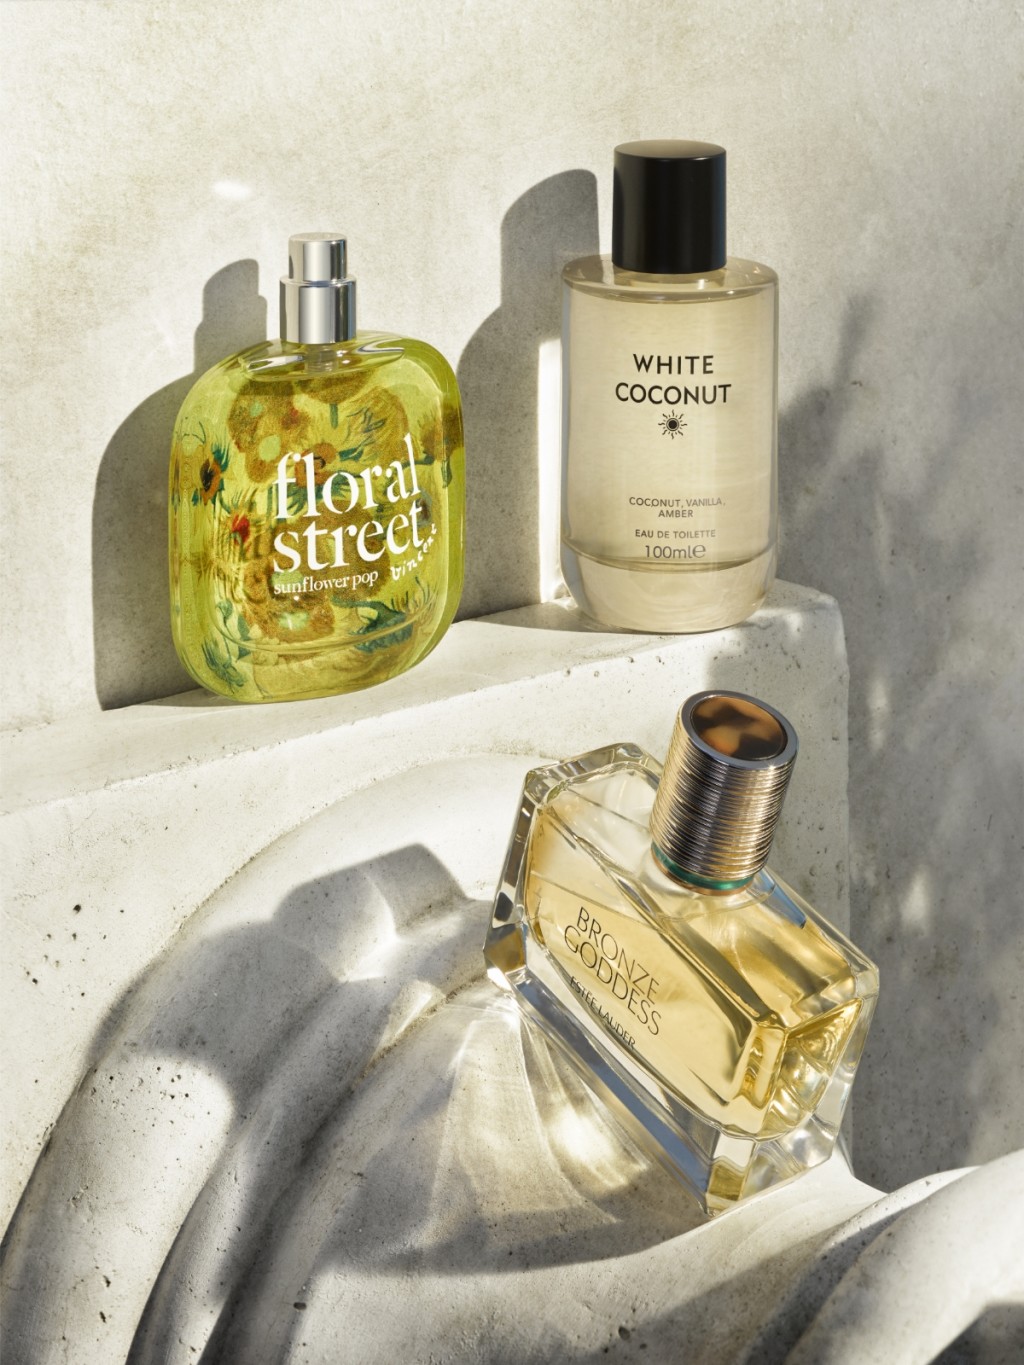 Fragrances to treat a loved one. Shop perfumes